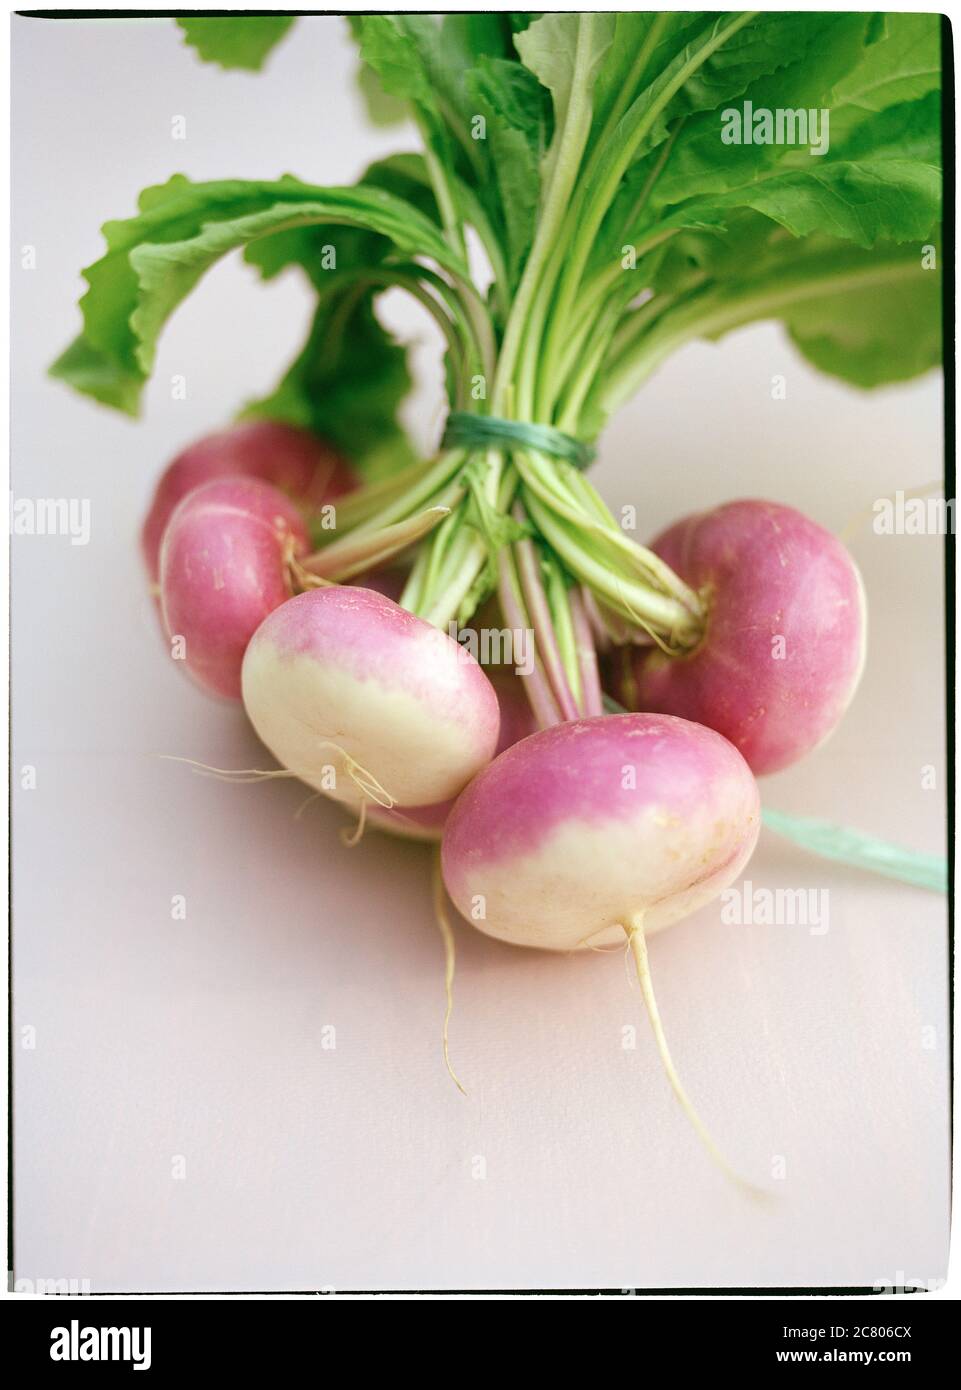 Baby turnips tied in a bunch Stock Photo